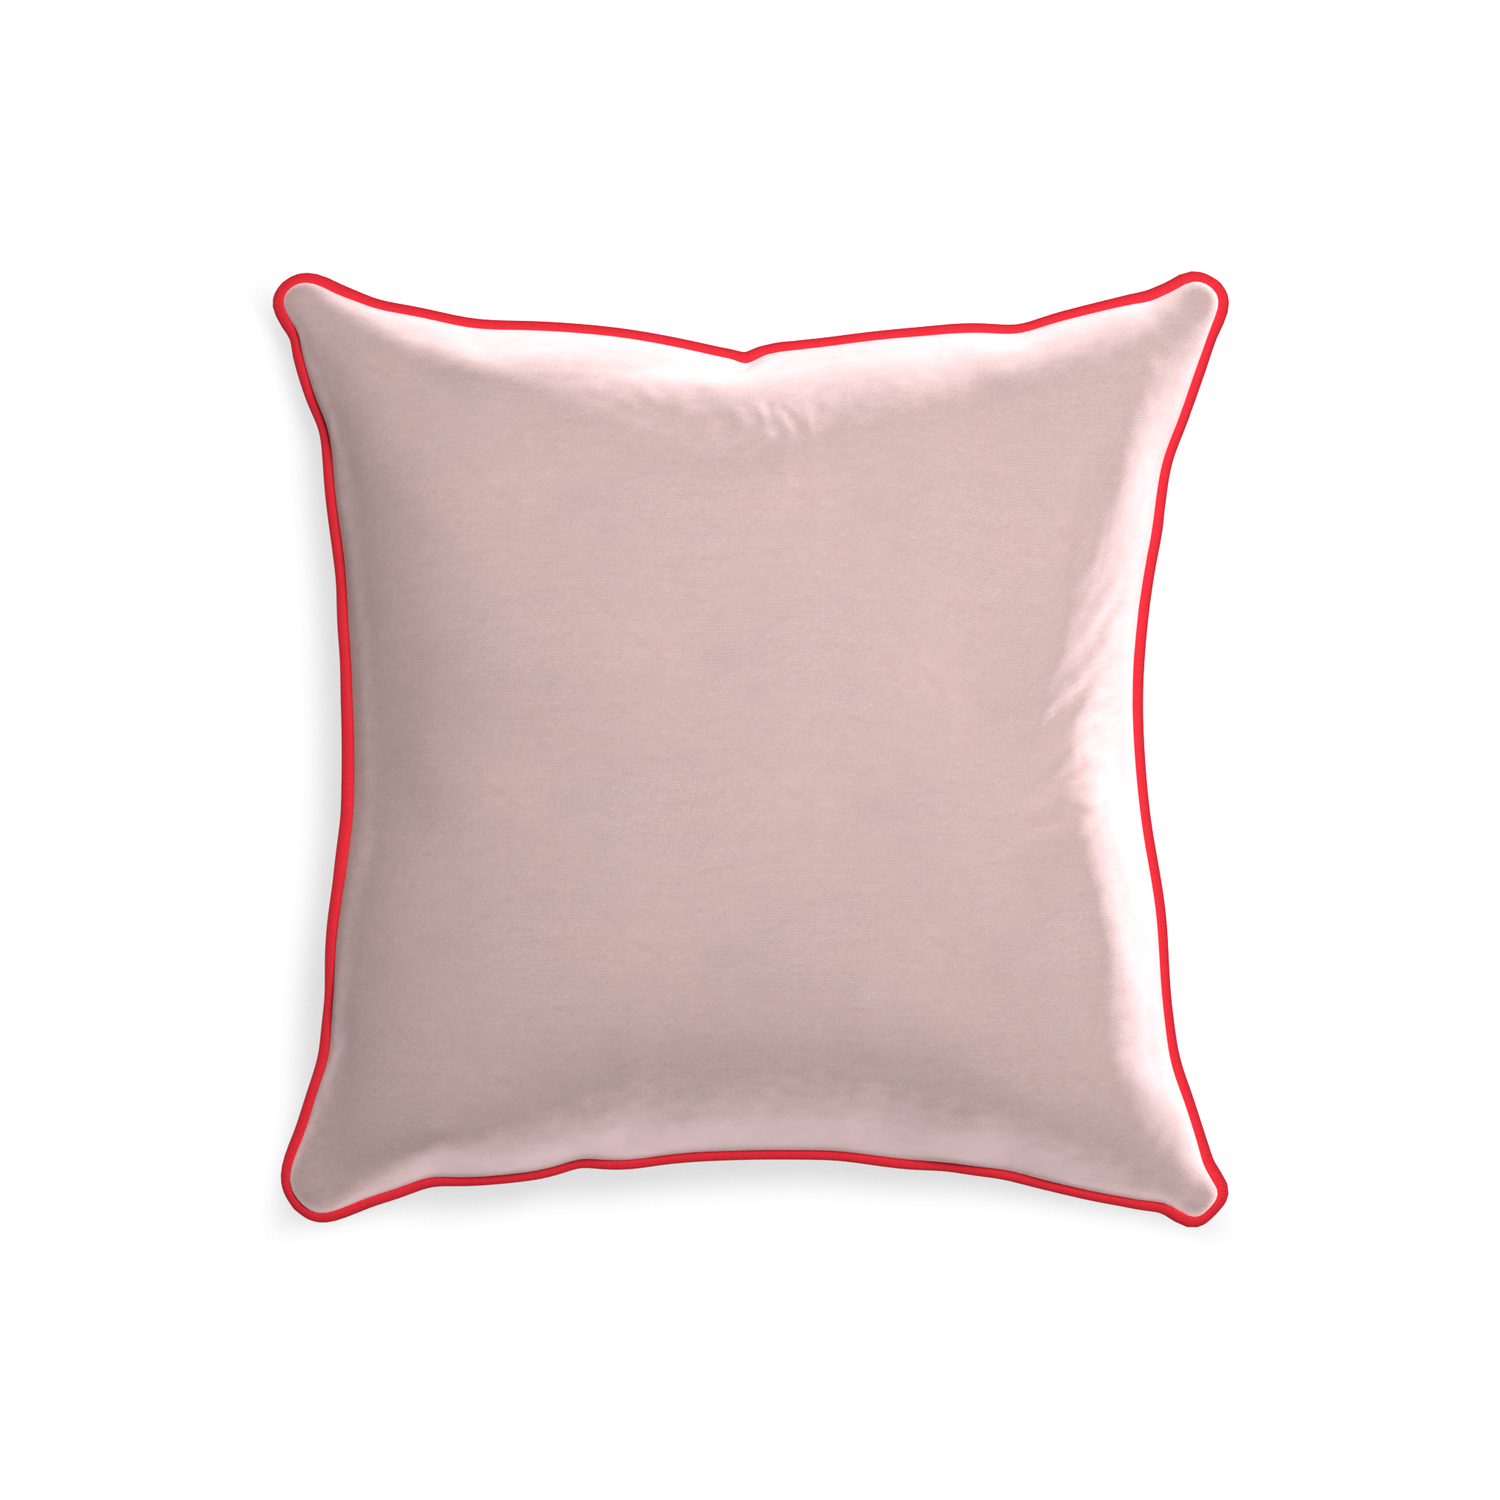 square light pink velvet pillow with red piping